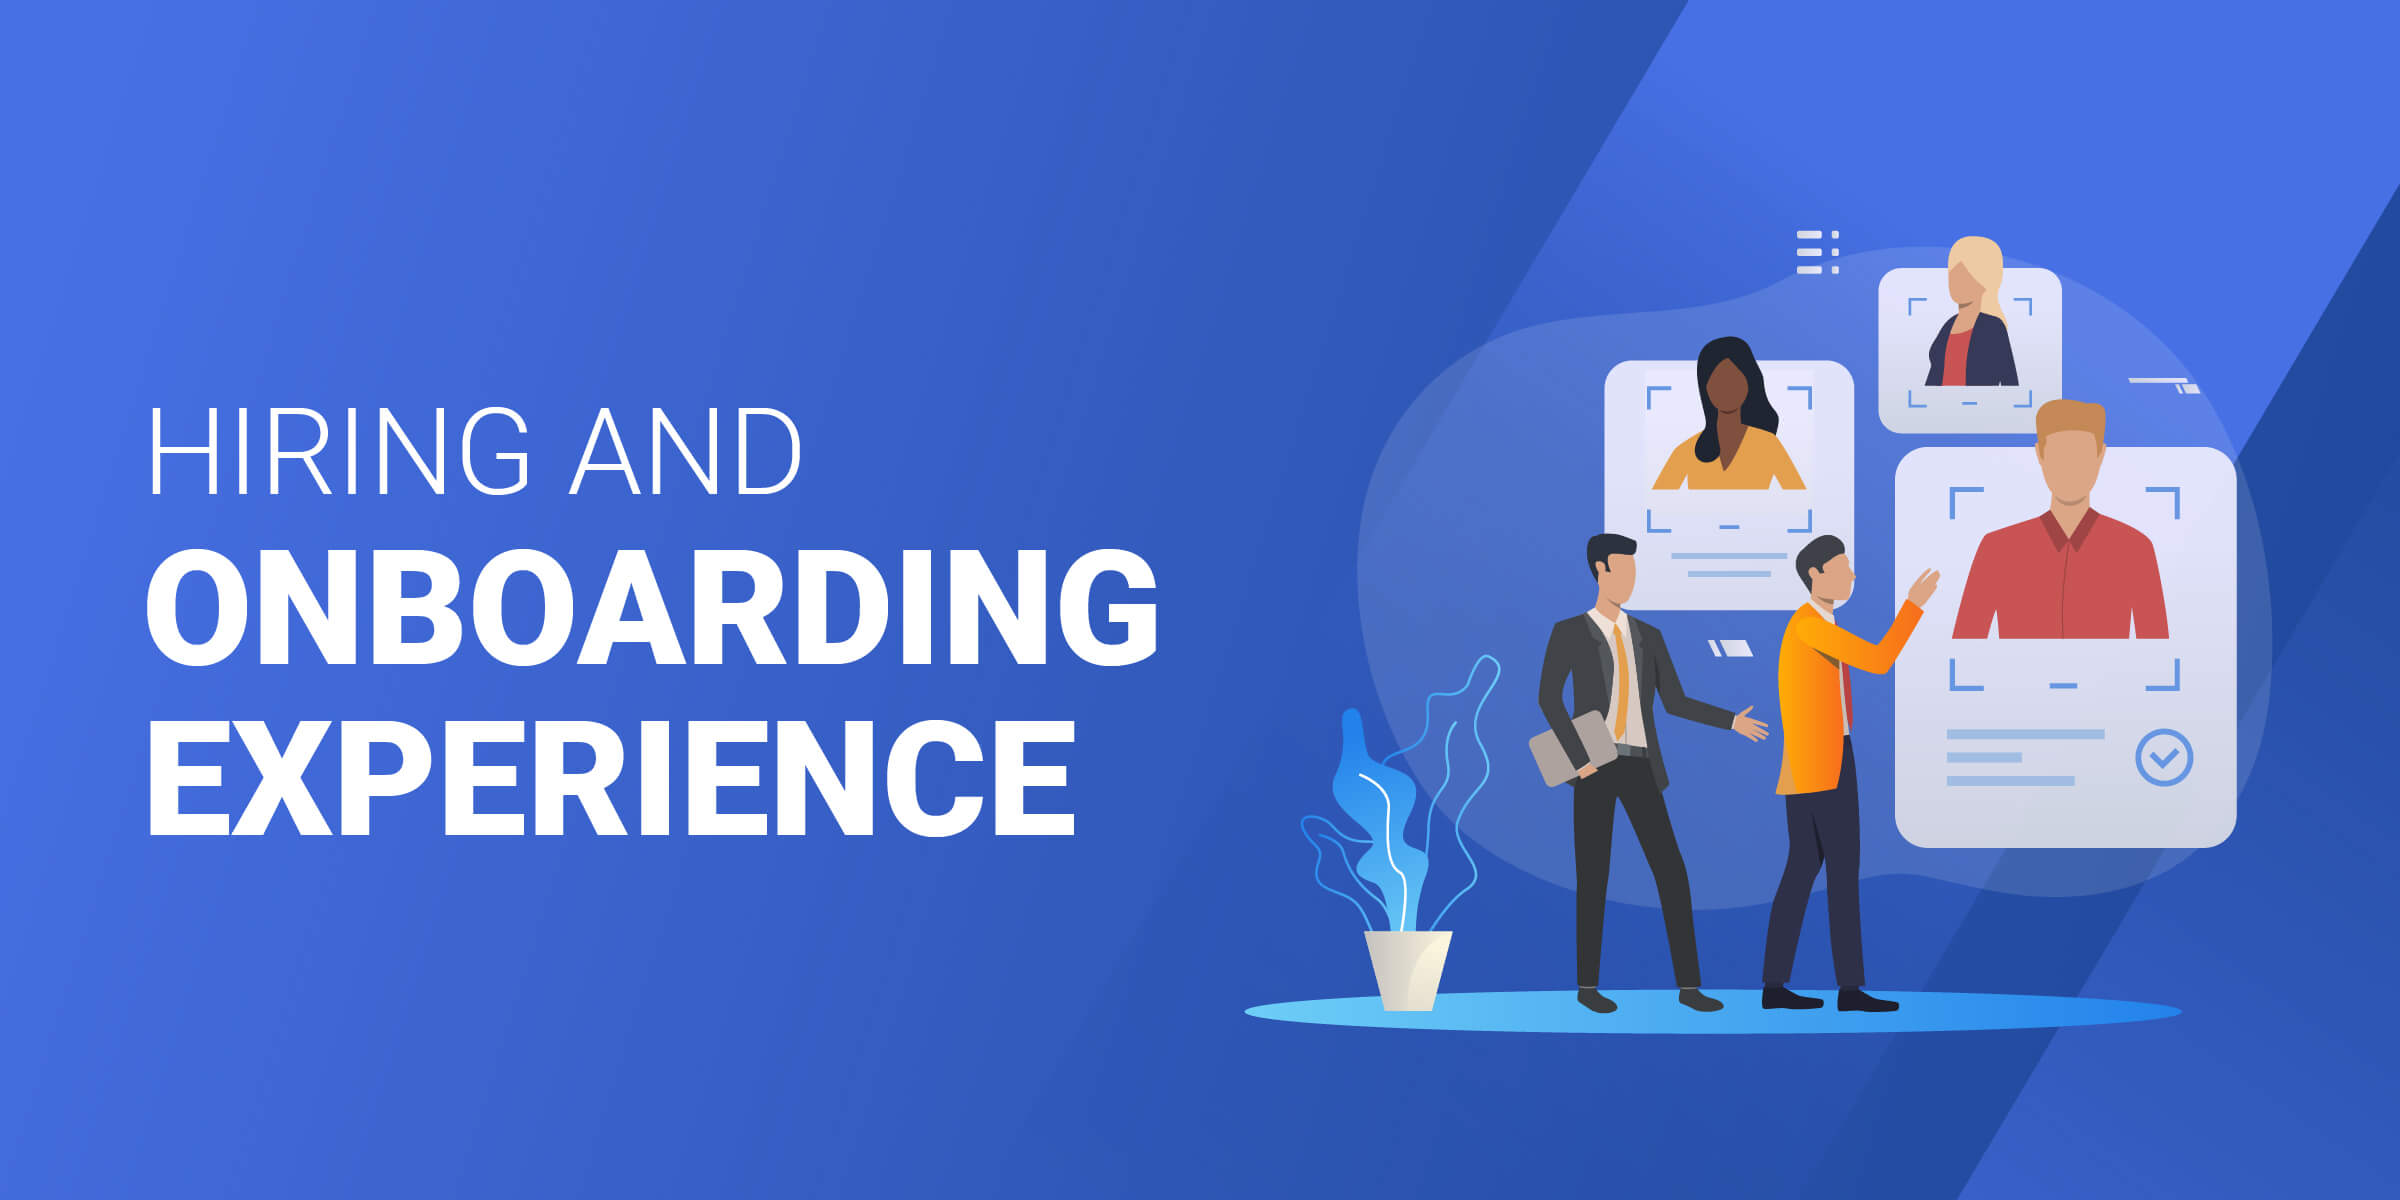 Hiring on Onboarding Experience